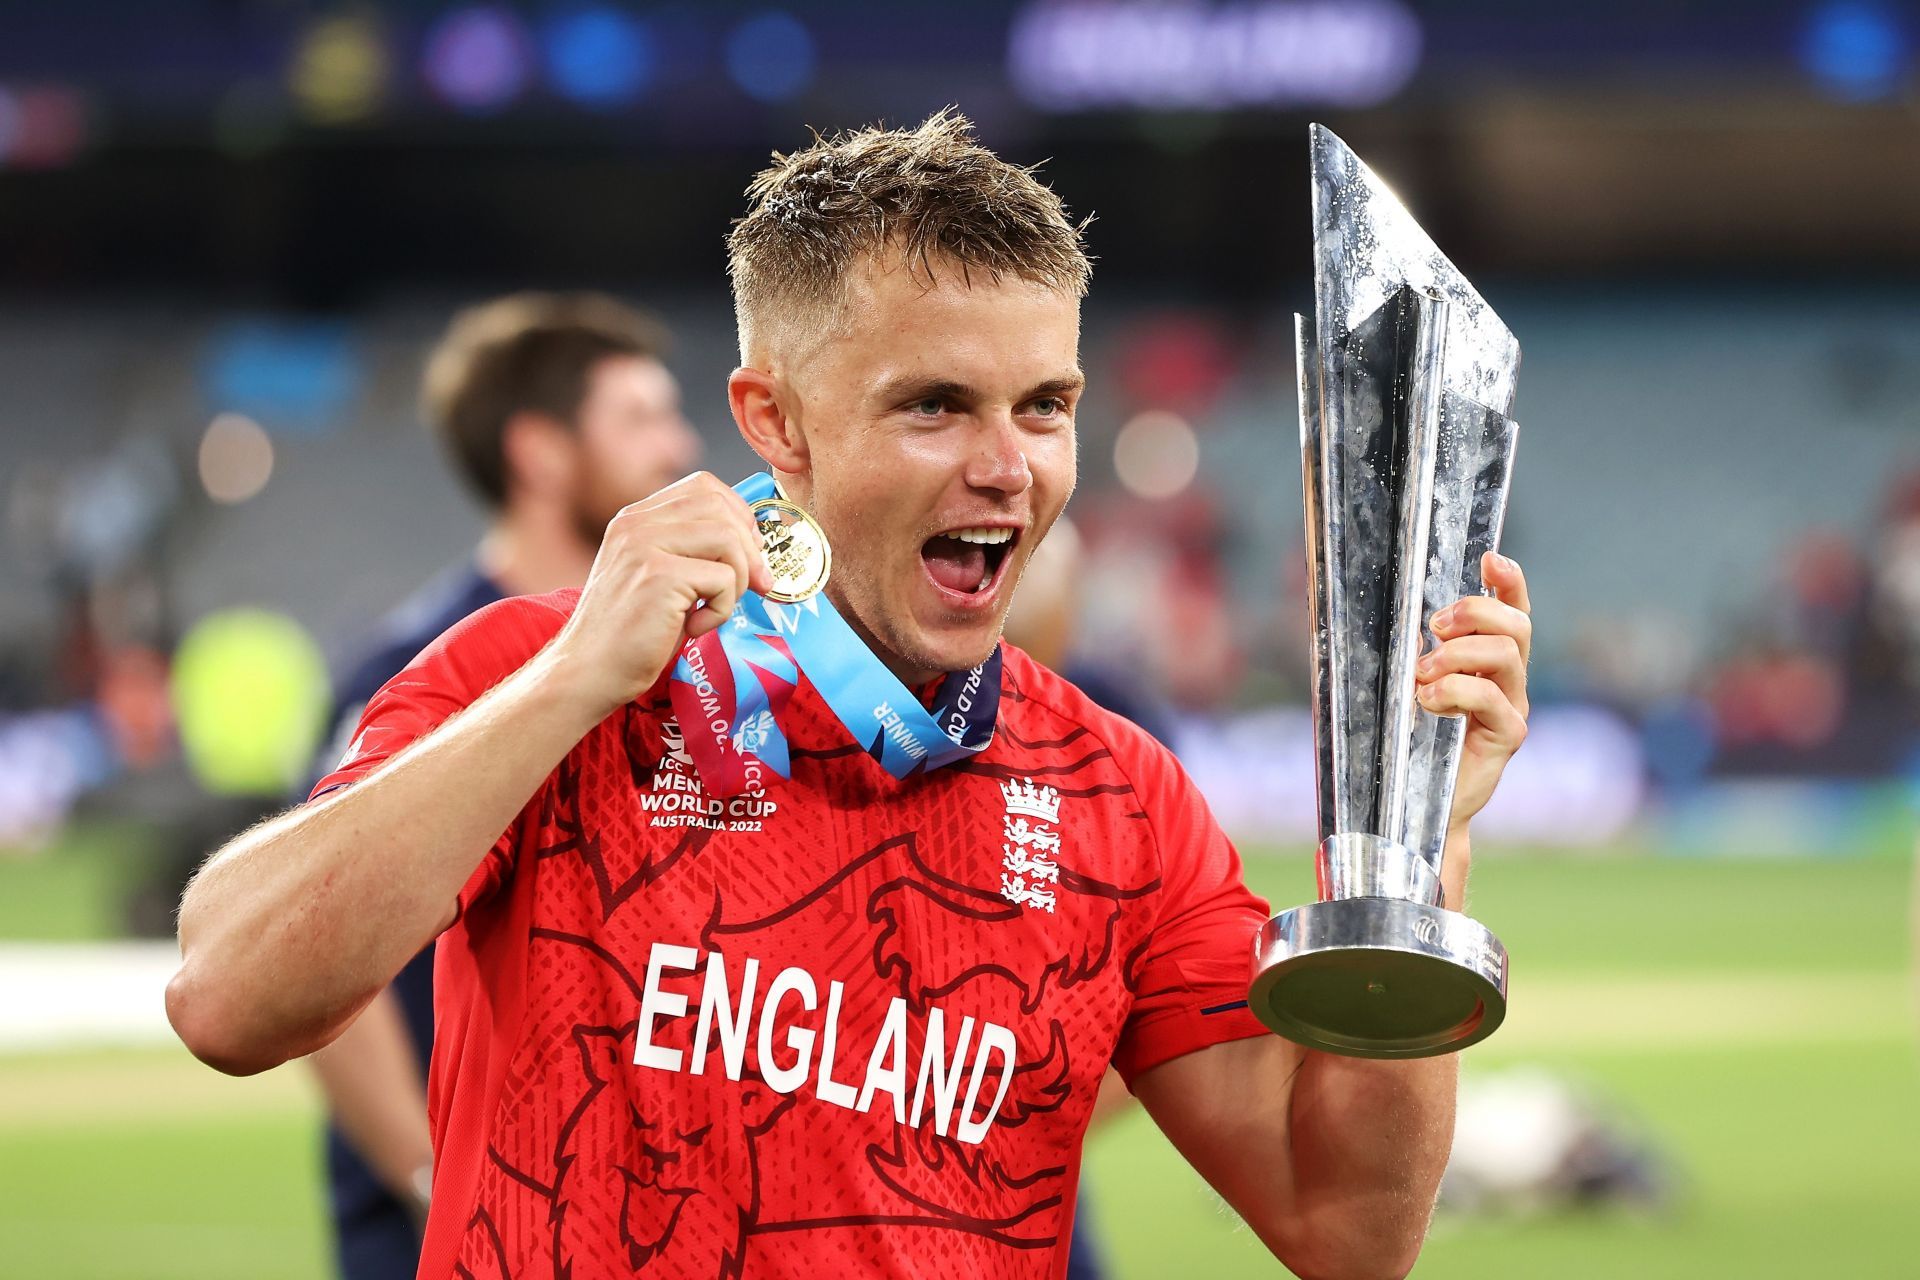 From World Cup hero to a record-breaking IPL fee, Sam Curran has had a memorable few months!